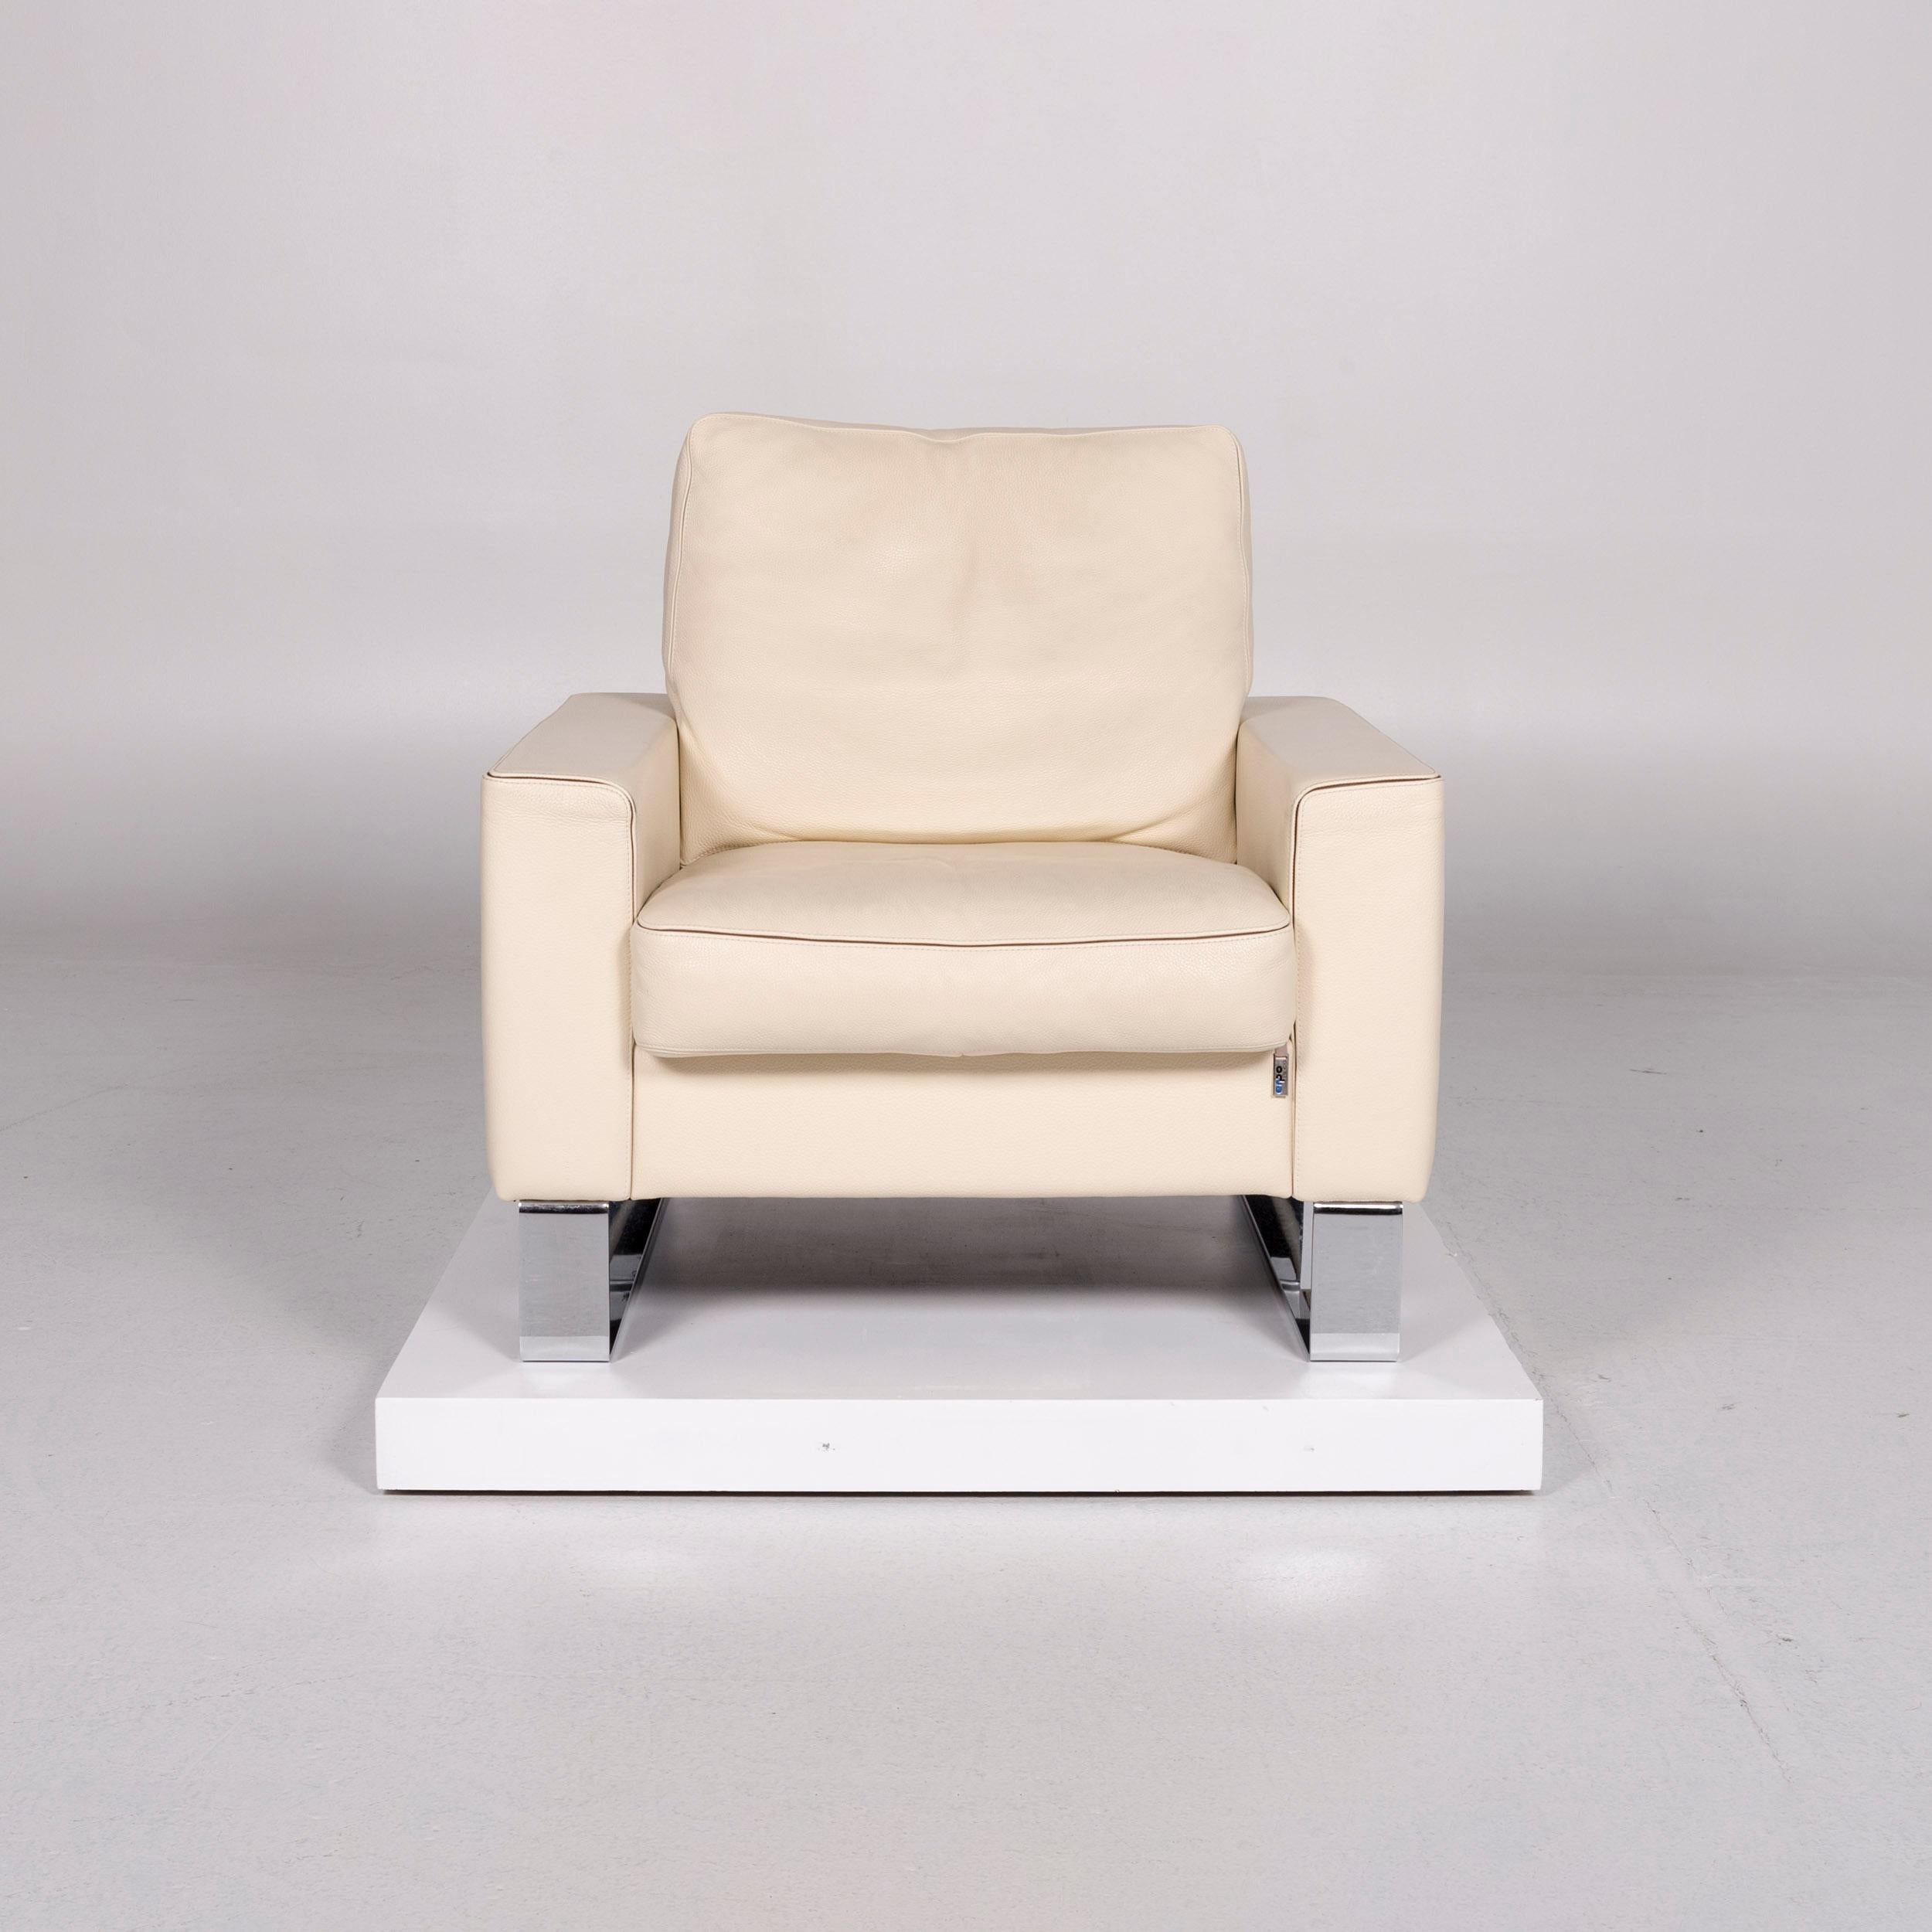 We bring to you an Erpo CL 400 leather armchair cream function.


Product measurements in centimetres:


Depth 94
Width 85
Height 83
Seat-height 48
Rest-height 54
Seat-depth 50
Seat-width 53
Back-height 45.
  